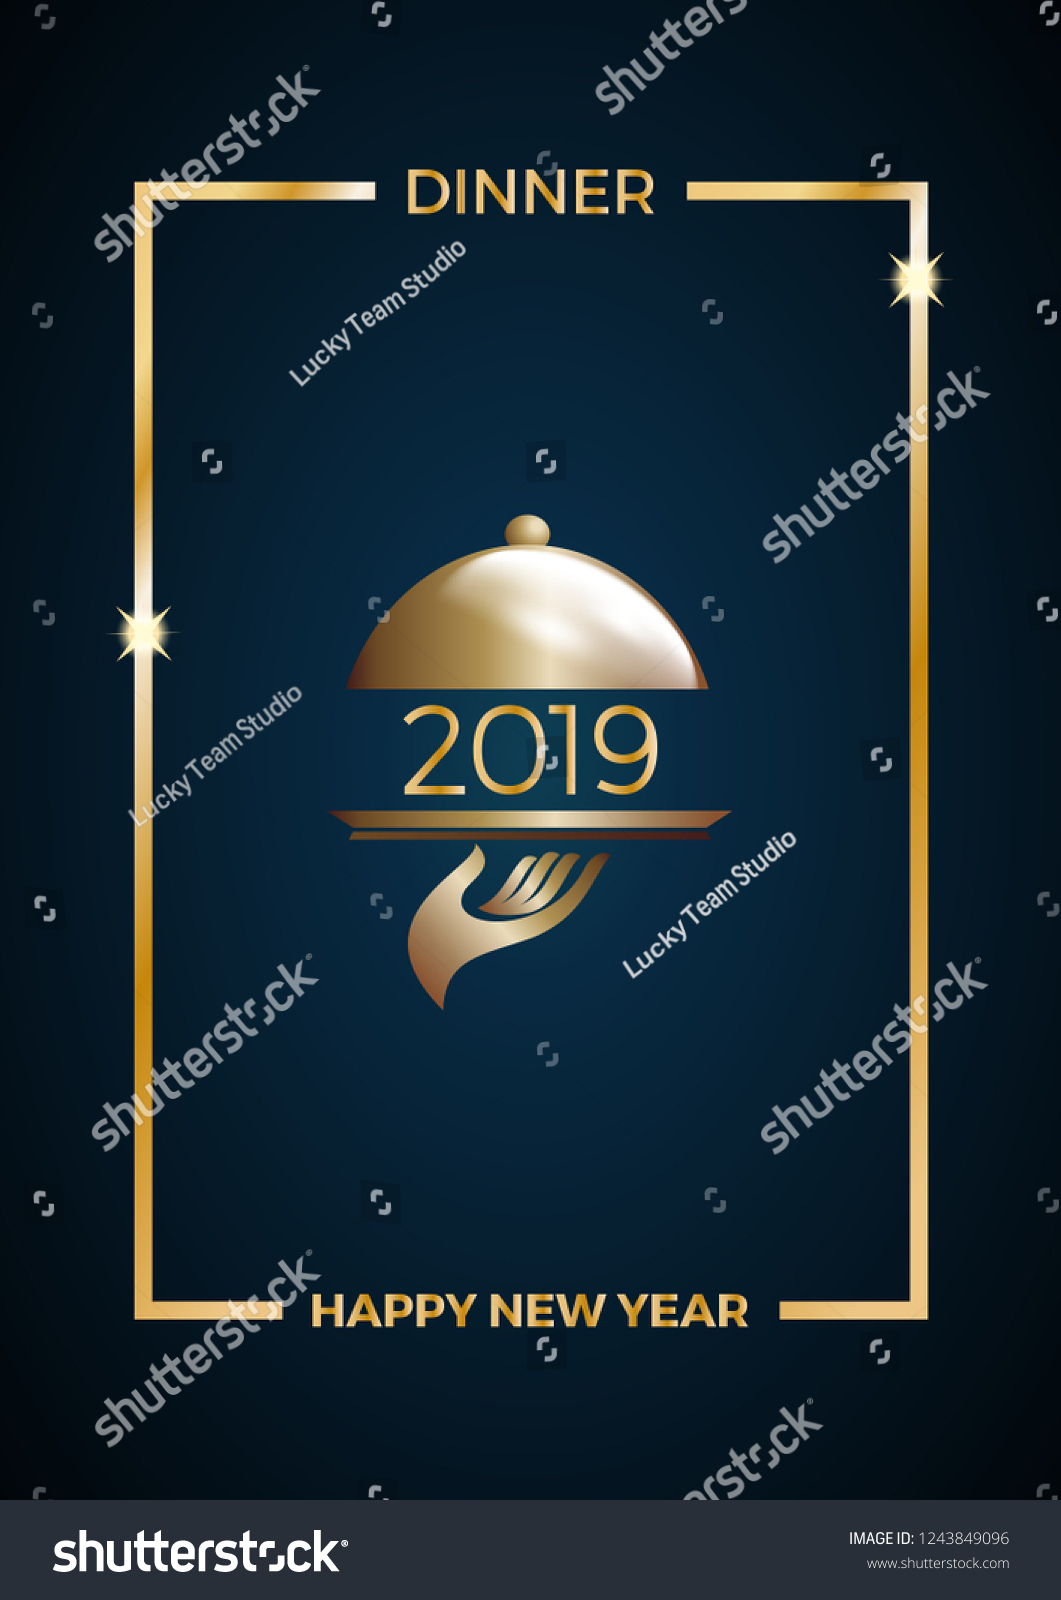 2019 New Years Eve Dinner Template Stock Vector (Royalty For New Years Eve Menu Template